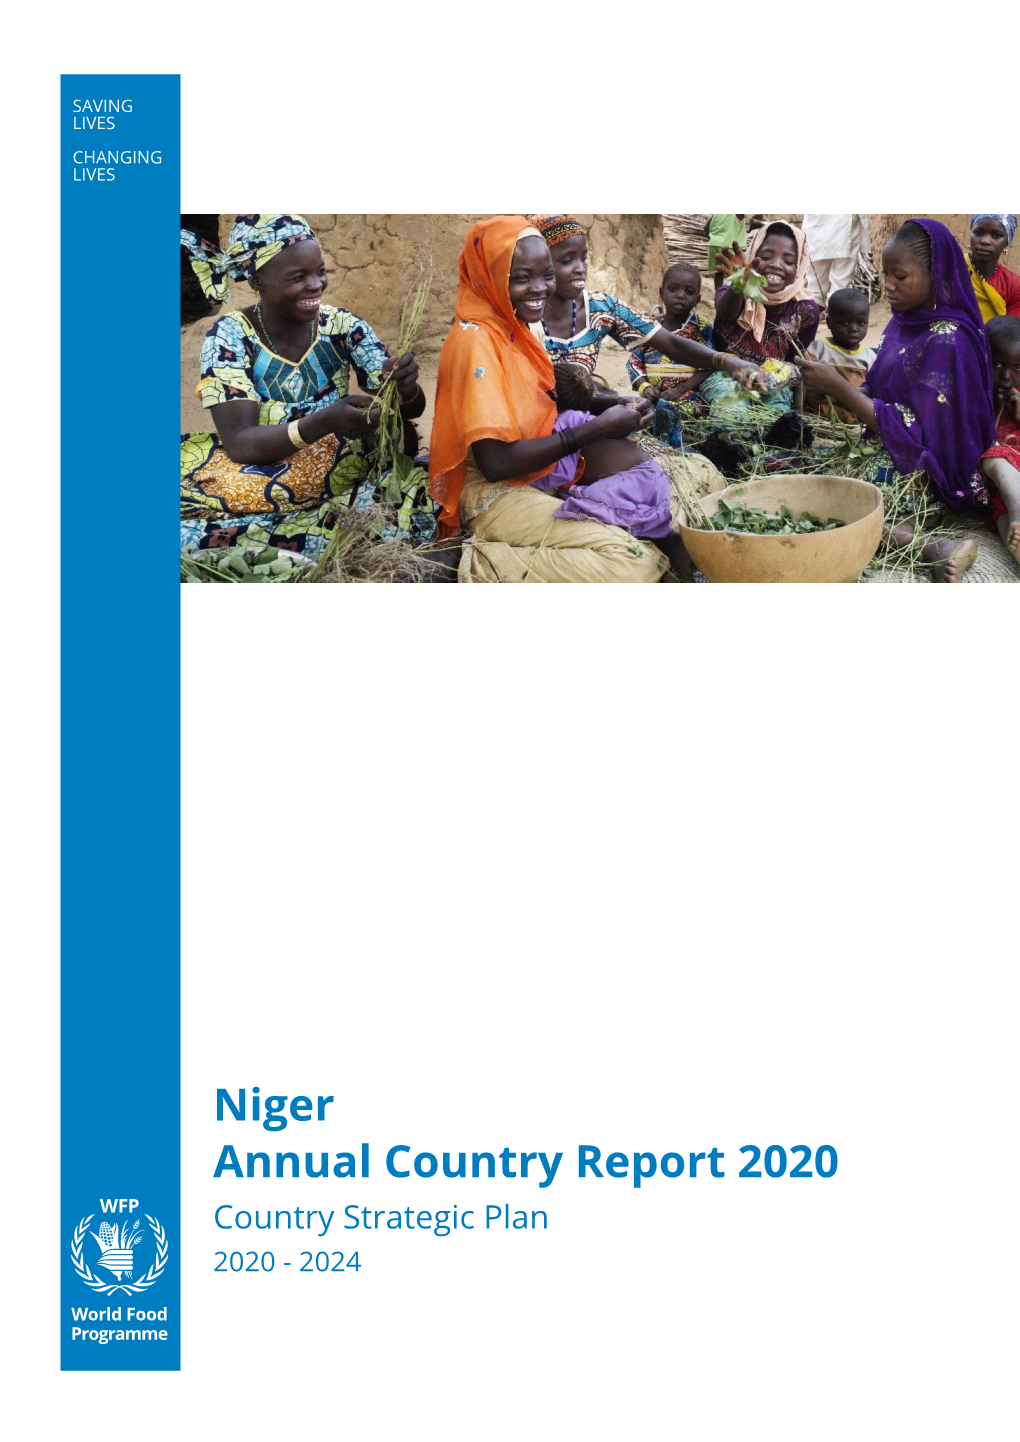 Niger Annual Country Report 2020 Country Strategic Plan 2020 - 2024 Table of Contents